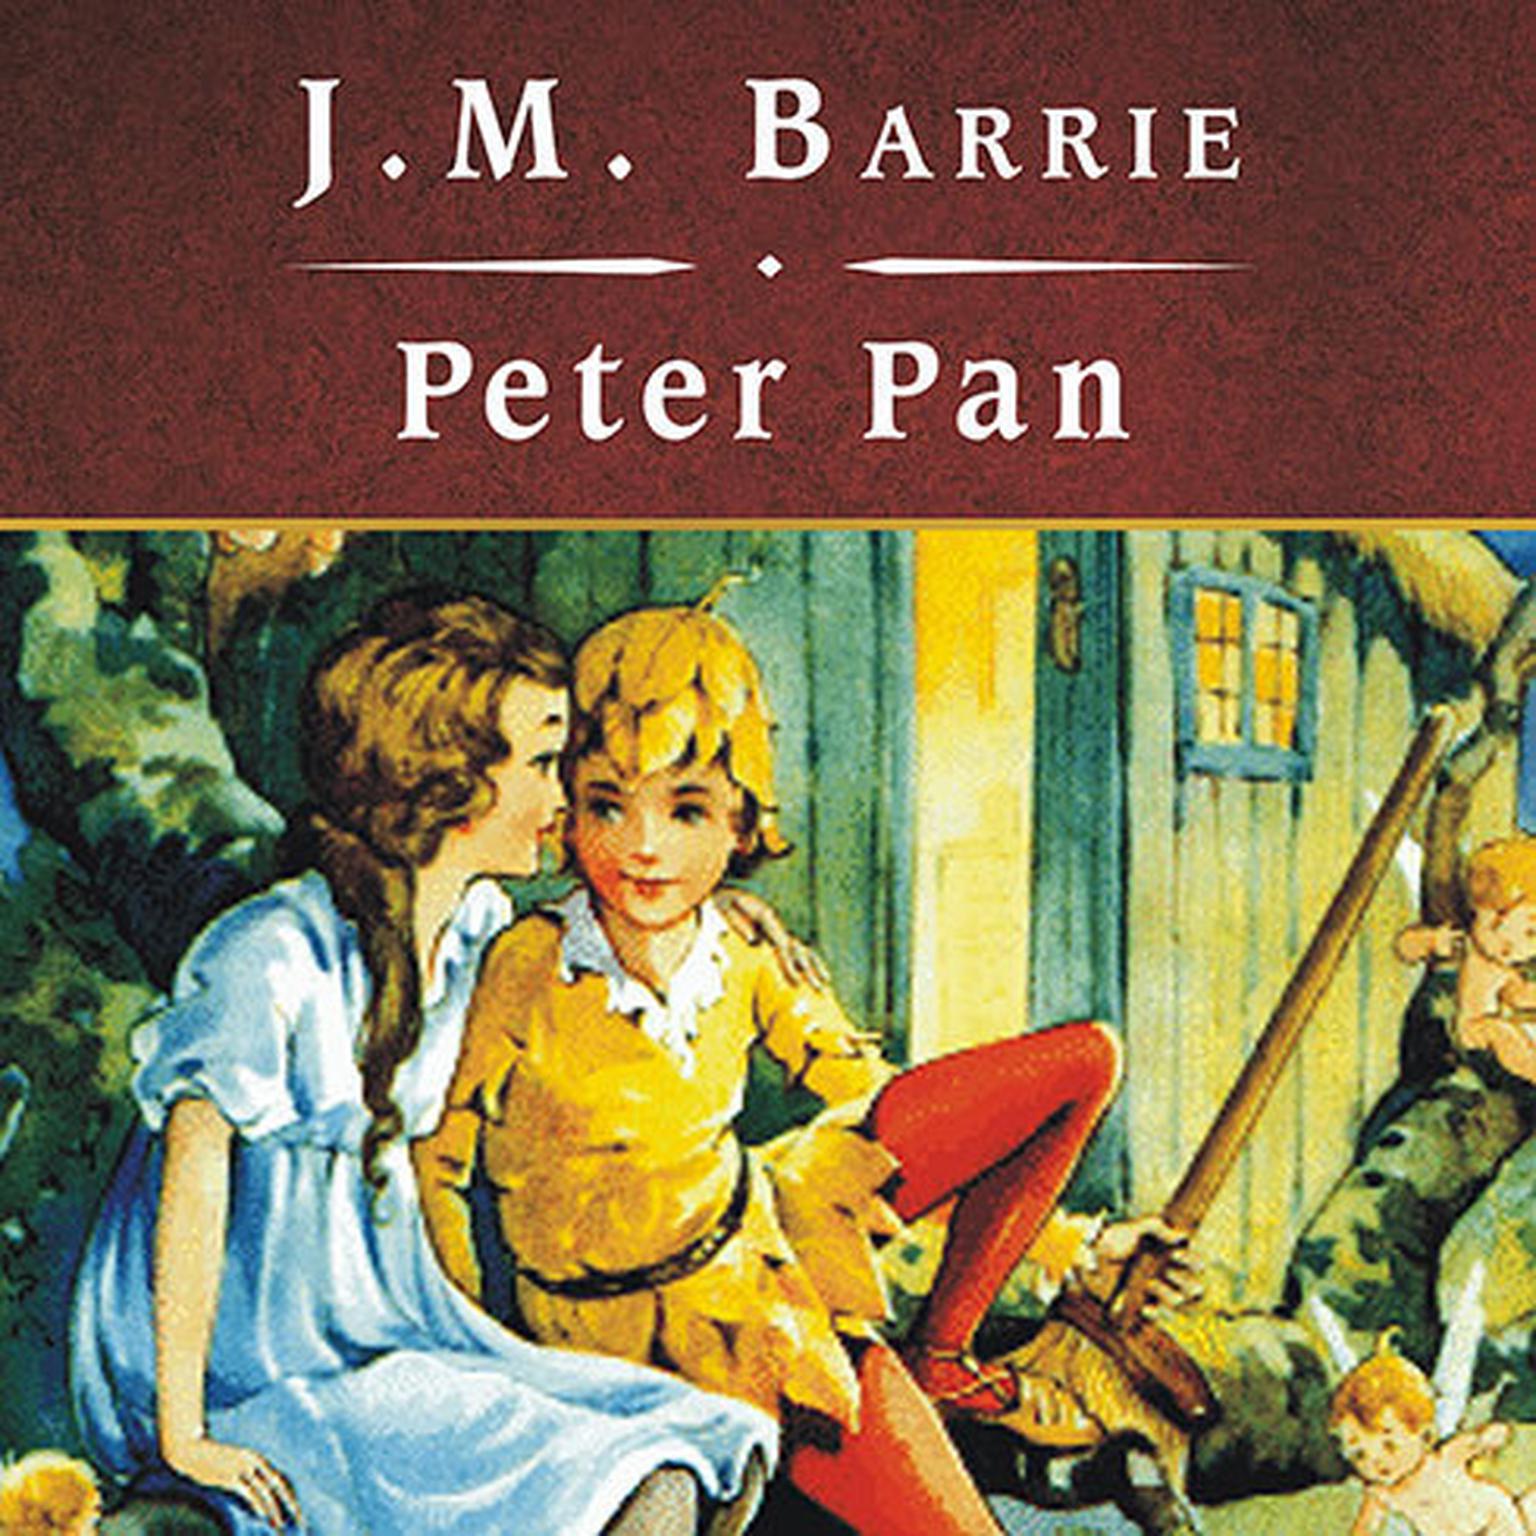 Peter Pan, with eBook Audiobook, by J. M. Barrie